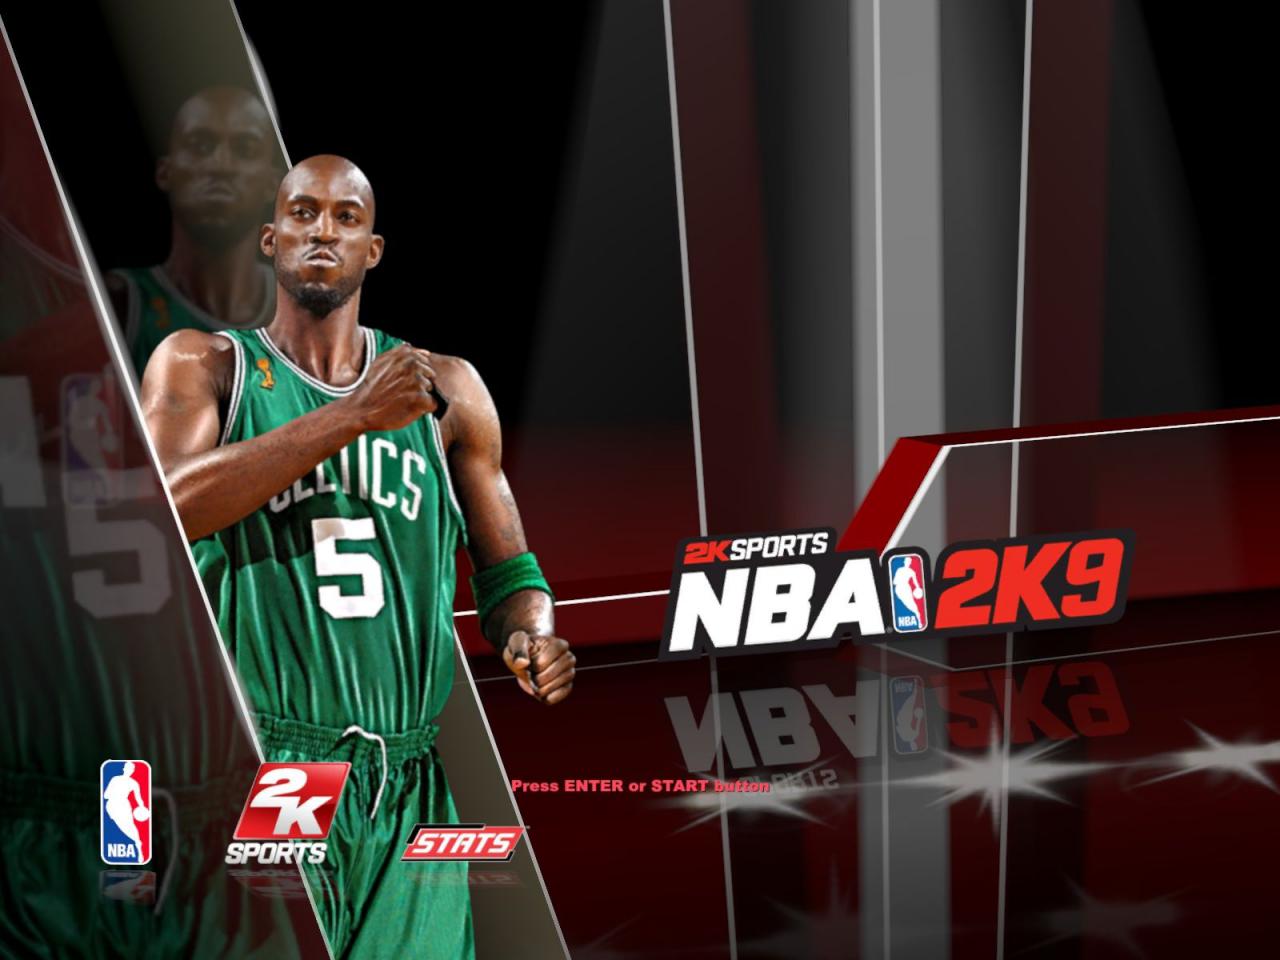 nba 2k9 rosters